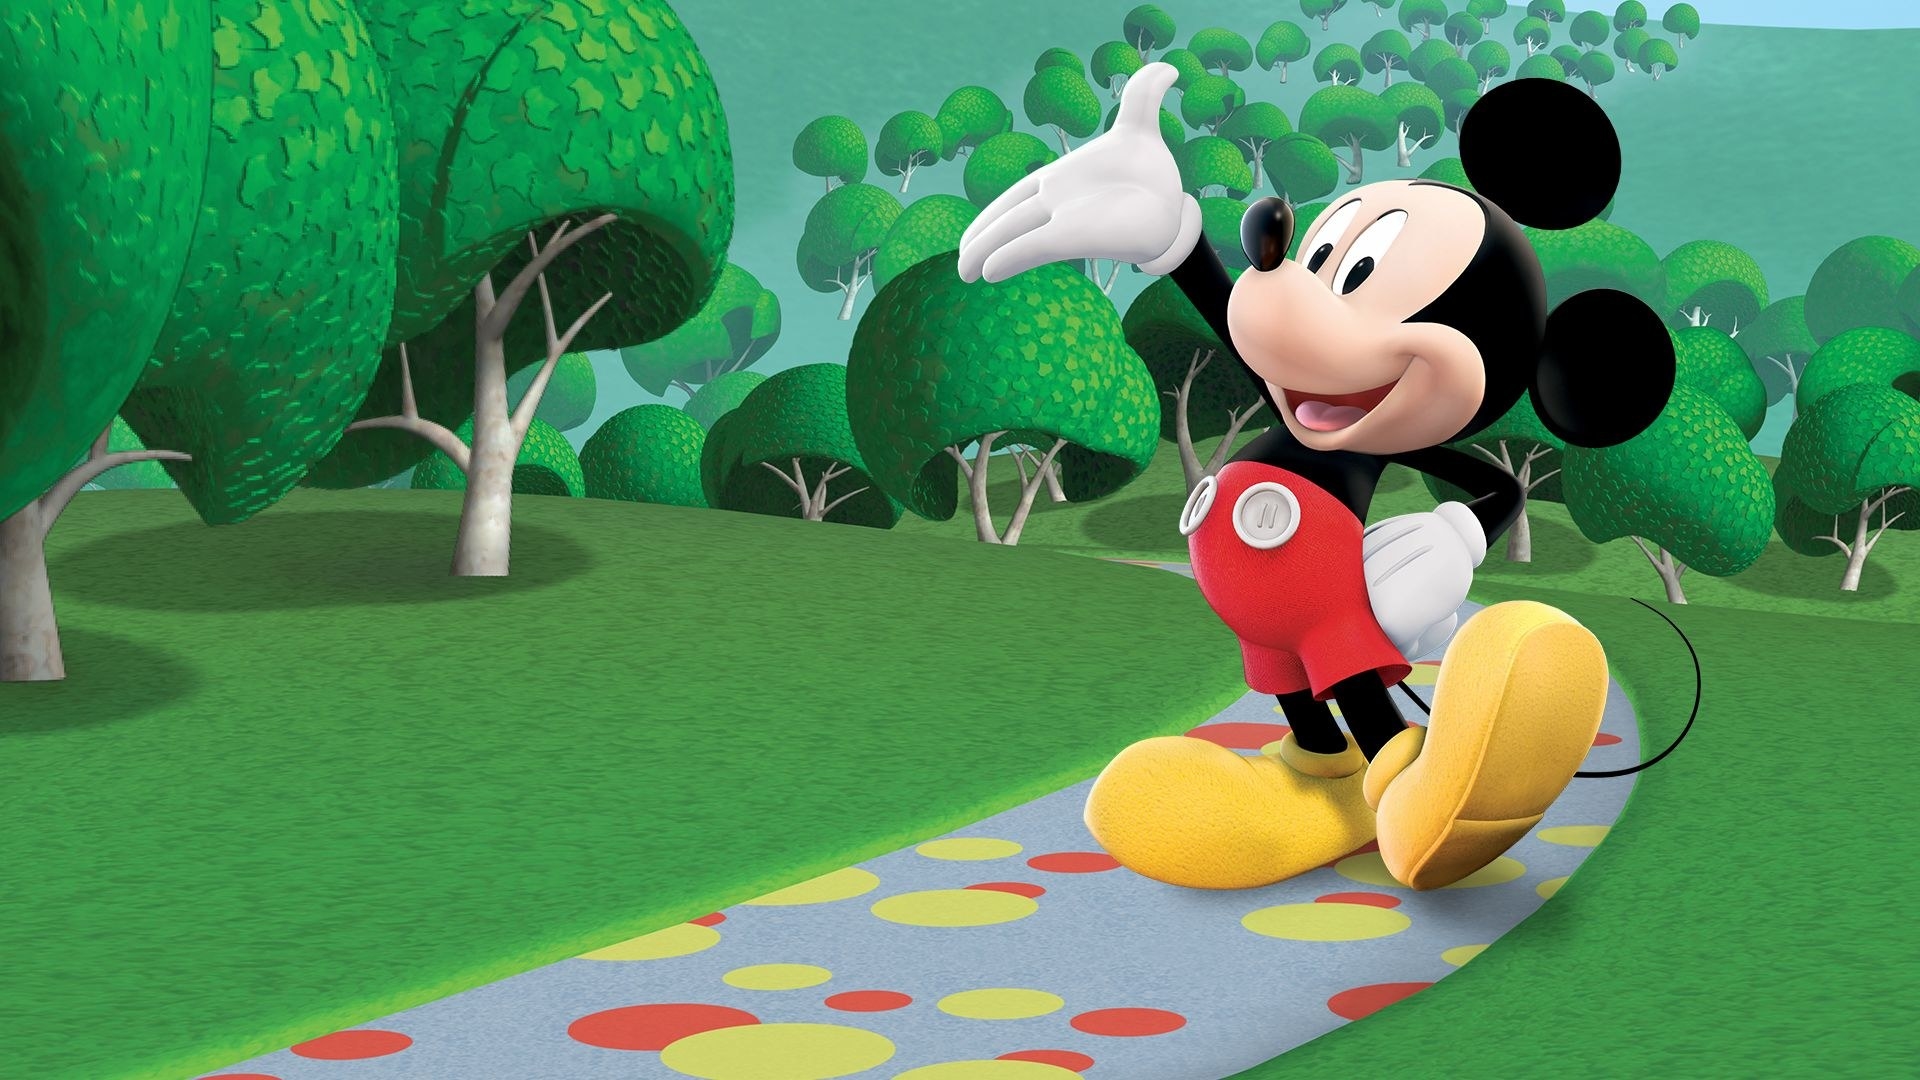 Mickey Mouse standing on a pathway in his clubhouse garden in a picture from the show Mickey Mouse Clubhouse